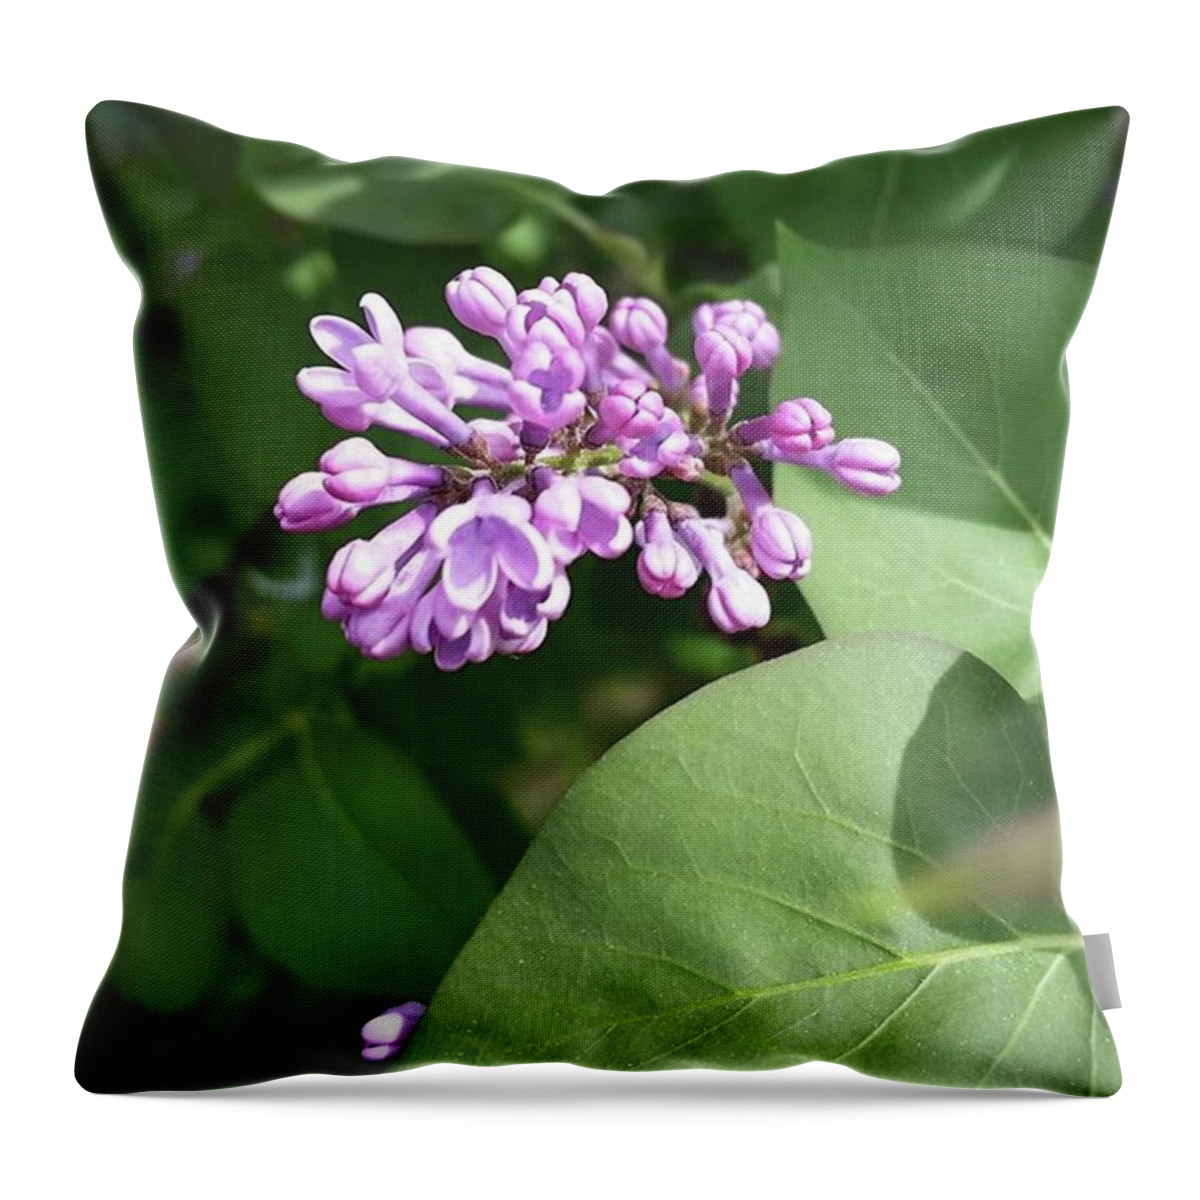 Springflowers Throw Pillow featuring the photograph Lilac #lilac #springflowers #spring by Krista Cagg